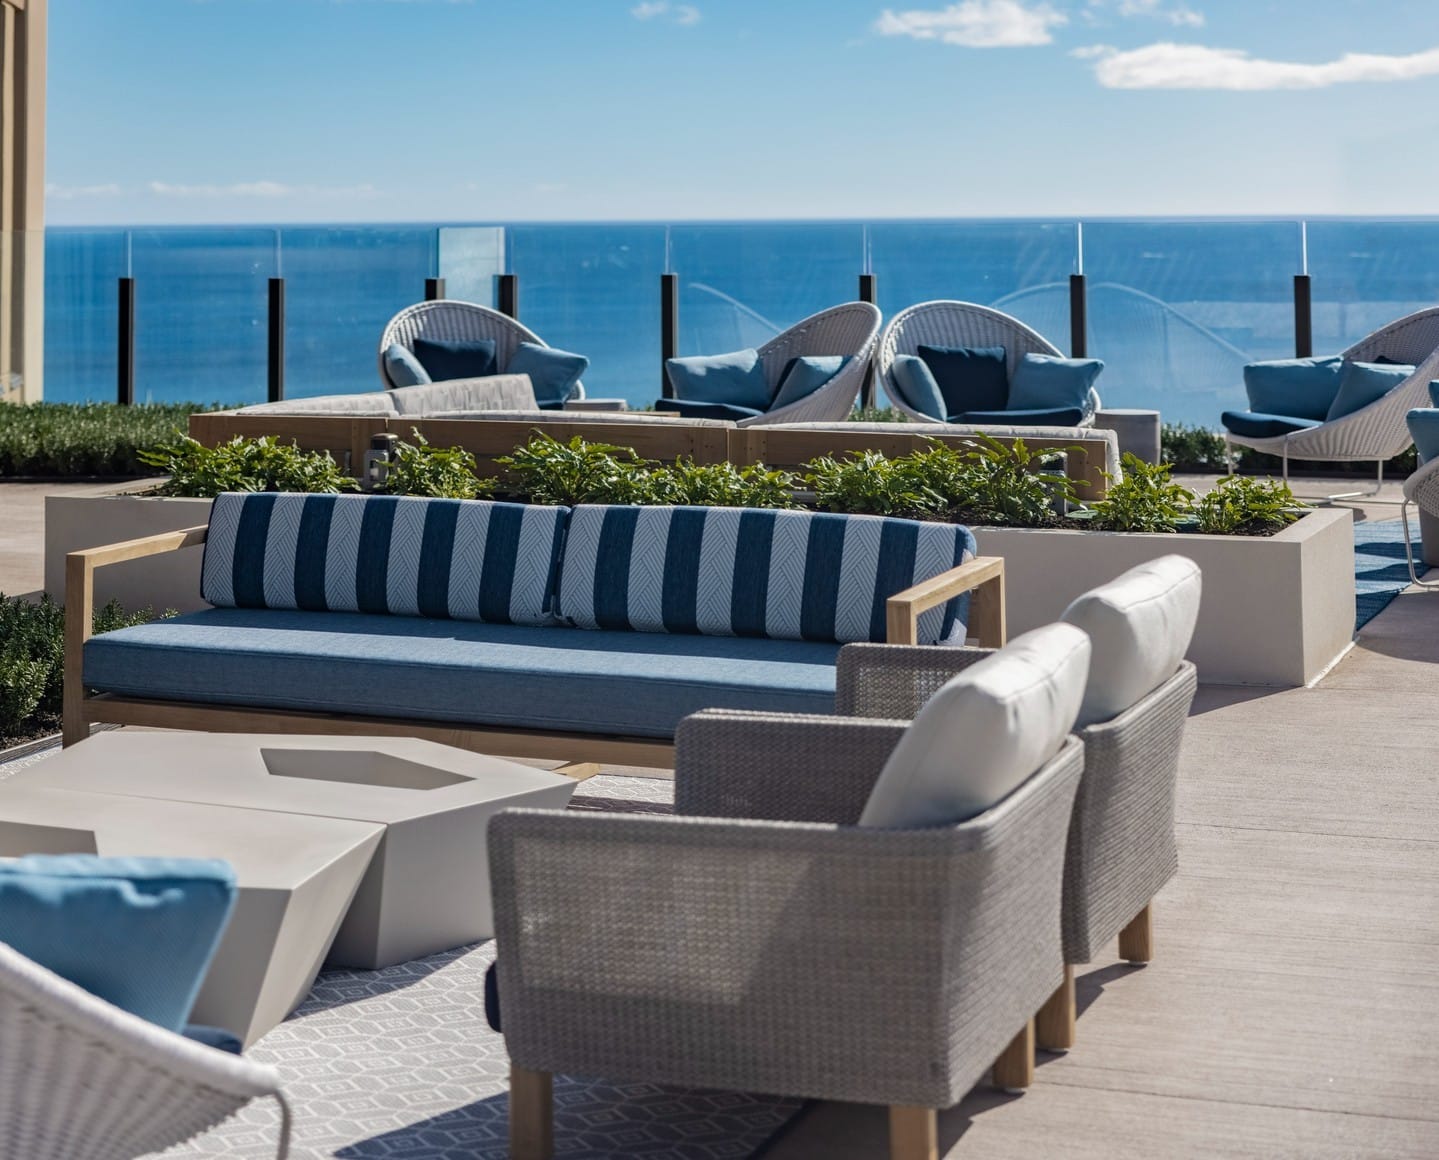 At ‘A‘ali‘i, the Lānai 42 Sky Deck caters to each chapter of your day. This rooftop amenity space provides one-of-a-kind leisure and fitness from sunrise to sunset, all with scenic ocean views. Visit www.aaliiwardvillage.com to learn more about these furnished, move-in ready residences.